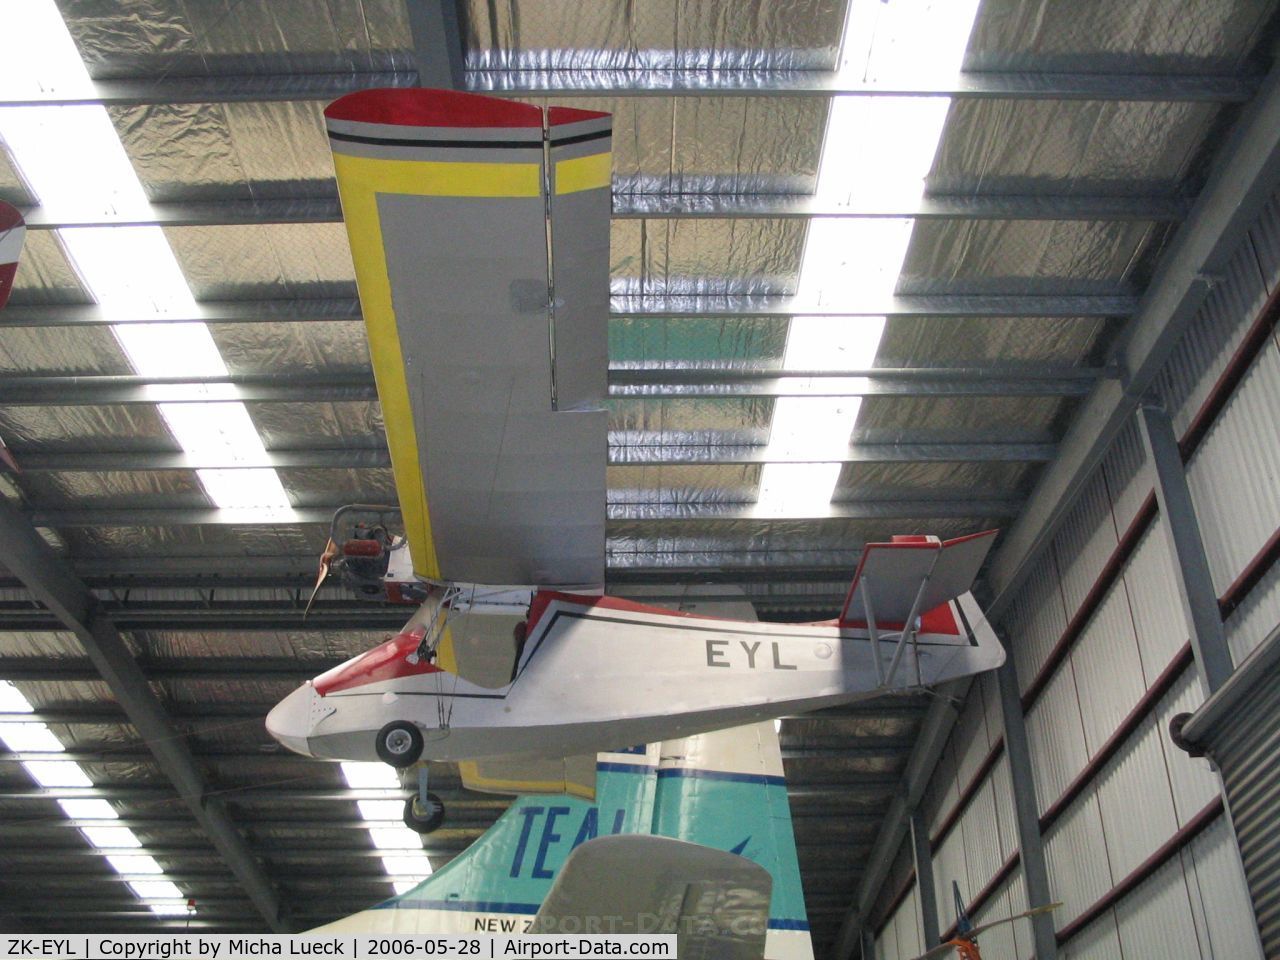 ZK-EYL, Scooter Homebuilt Model C/N 001, Flagor Eyl, also known as the 